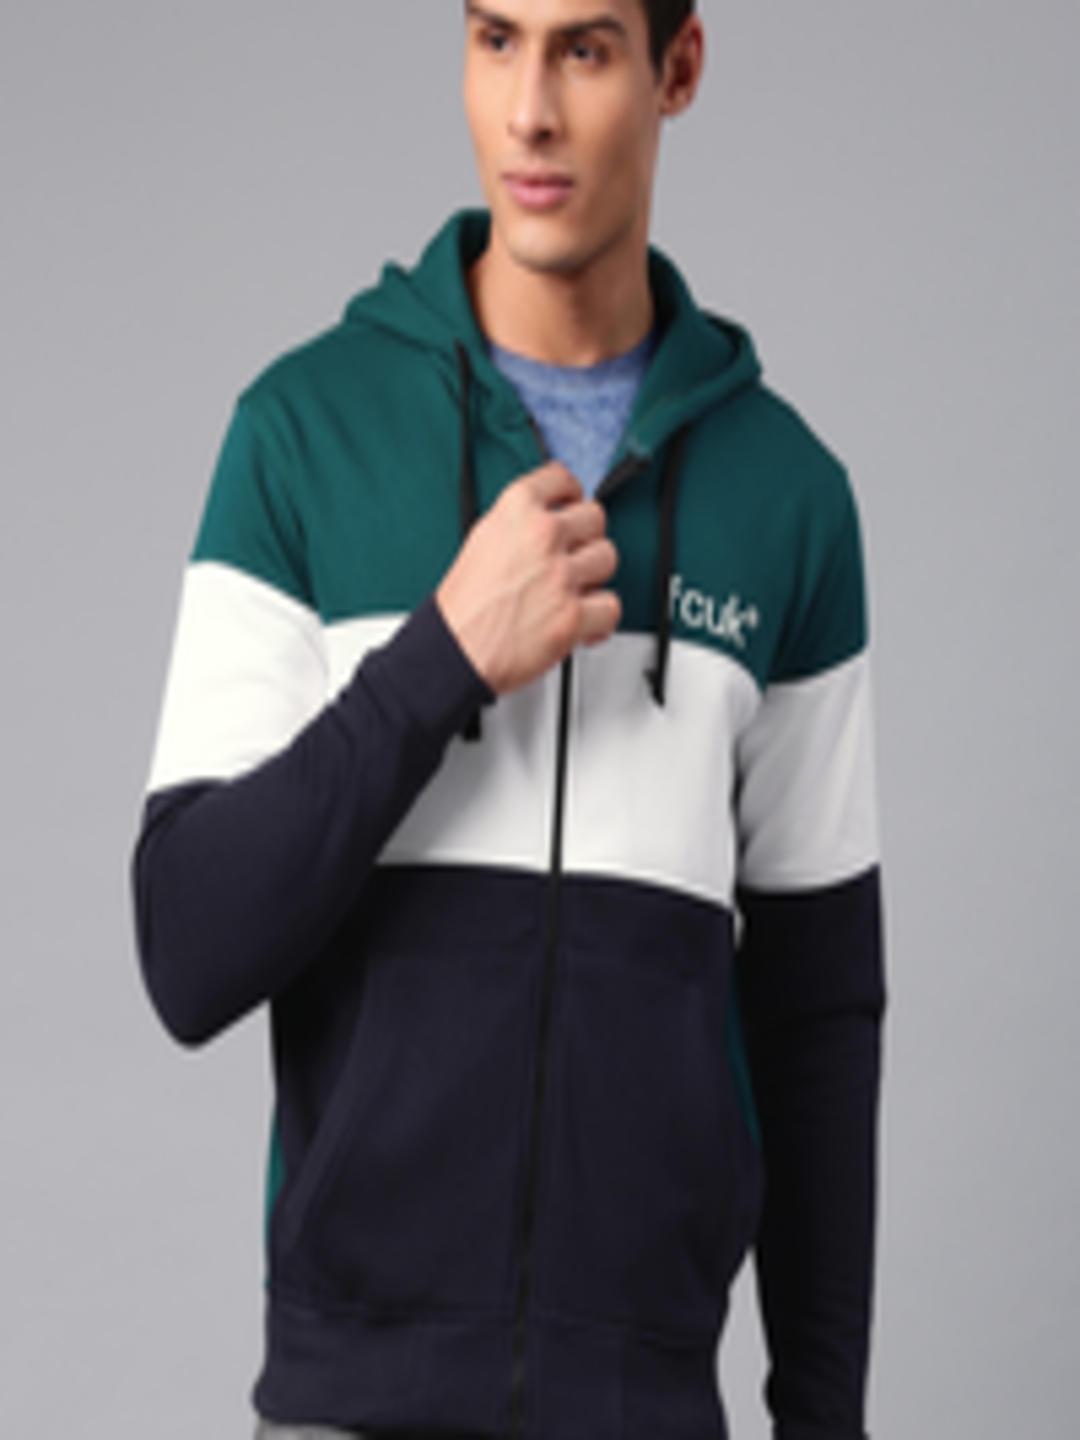 Buy French Connection Men Teal Blue & Navy Blue Colourblocked Hooded ...